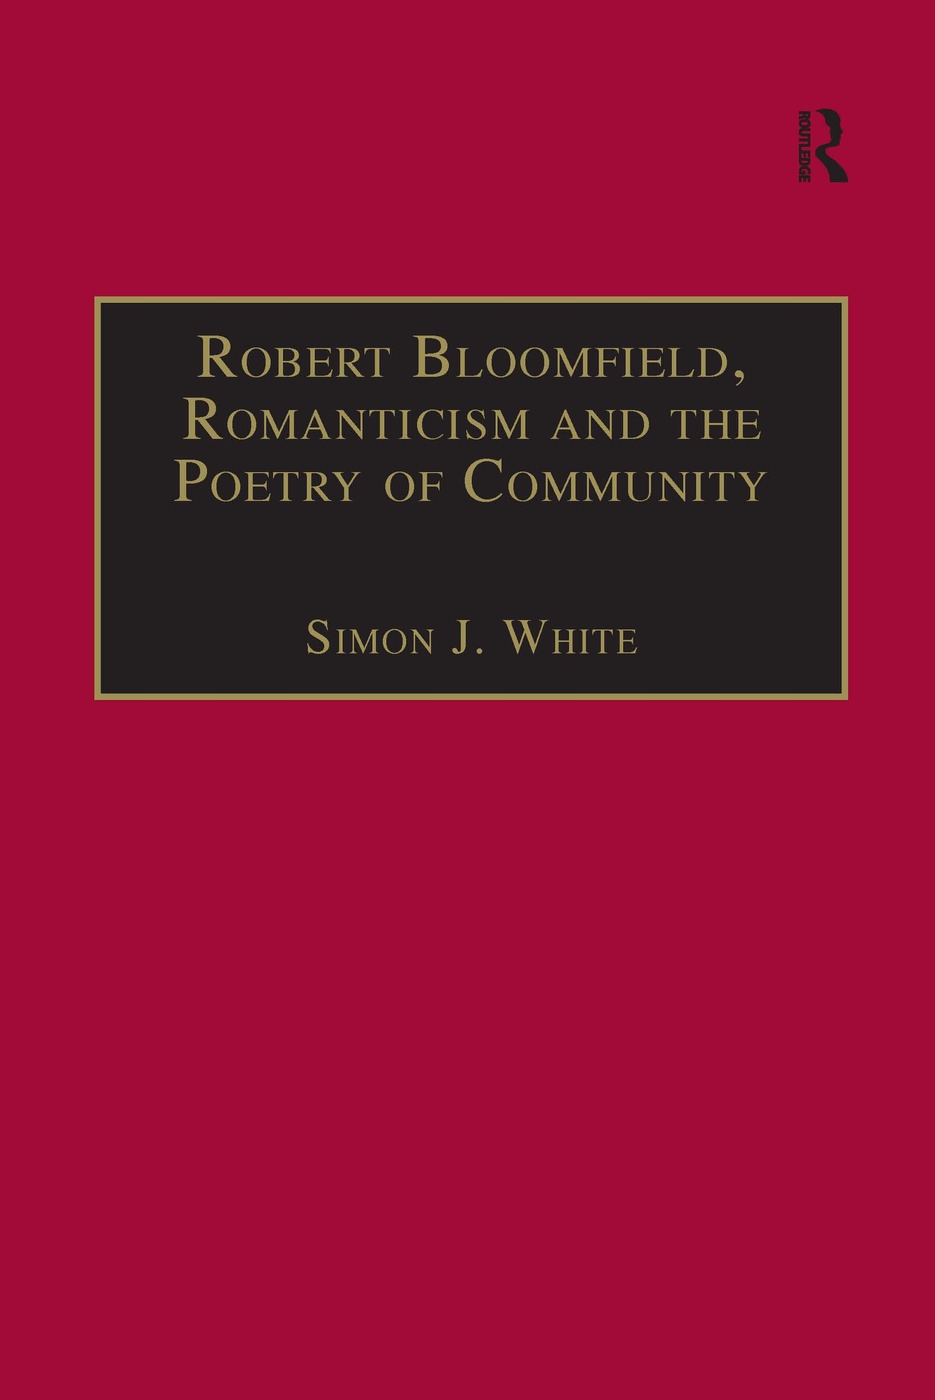 Robert Bloomfield, Romanticism and the Poetry of Community